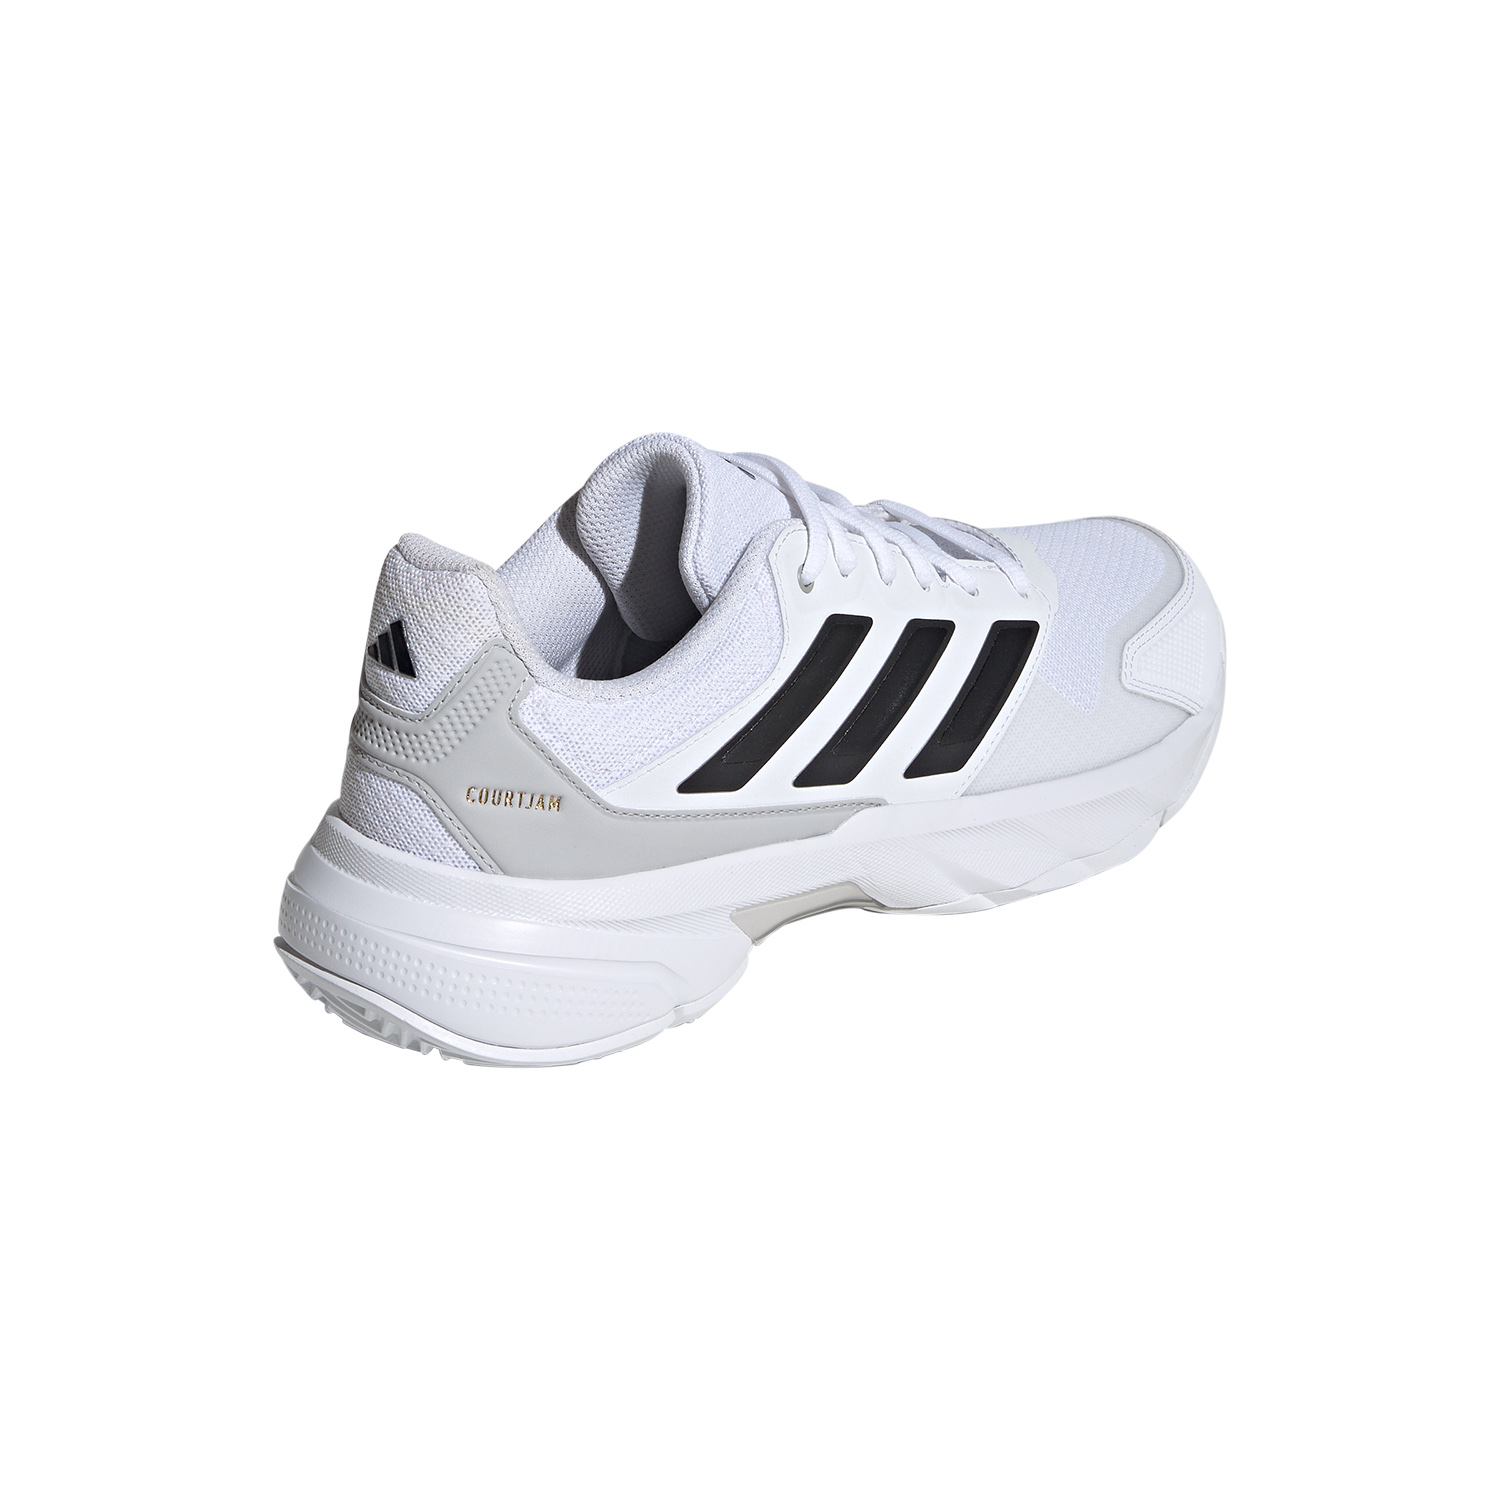 adidas CourtJam Control 3 - FTWR White/Core Black/Grey Two